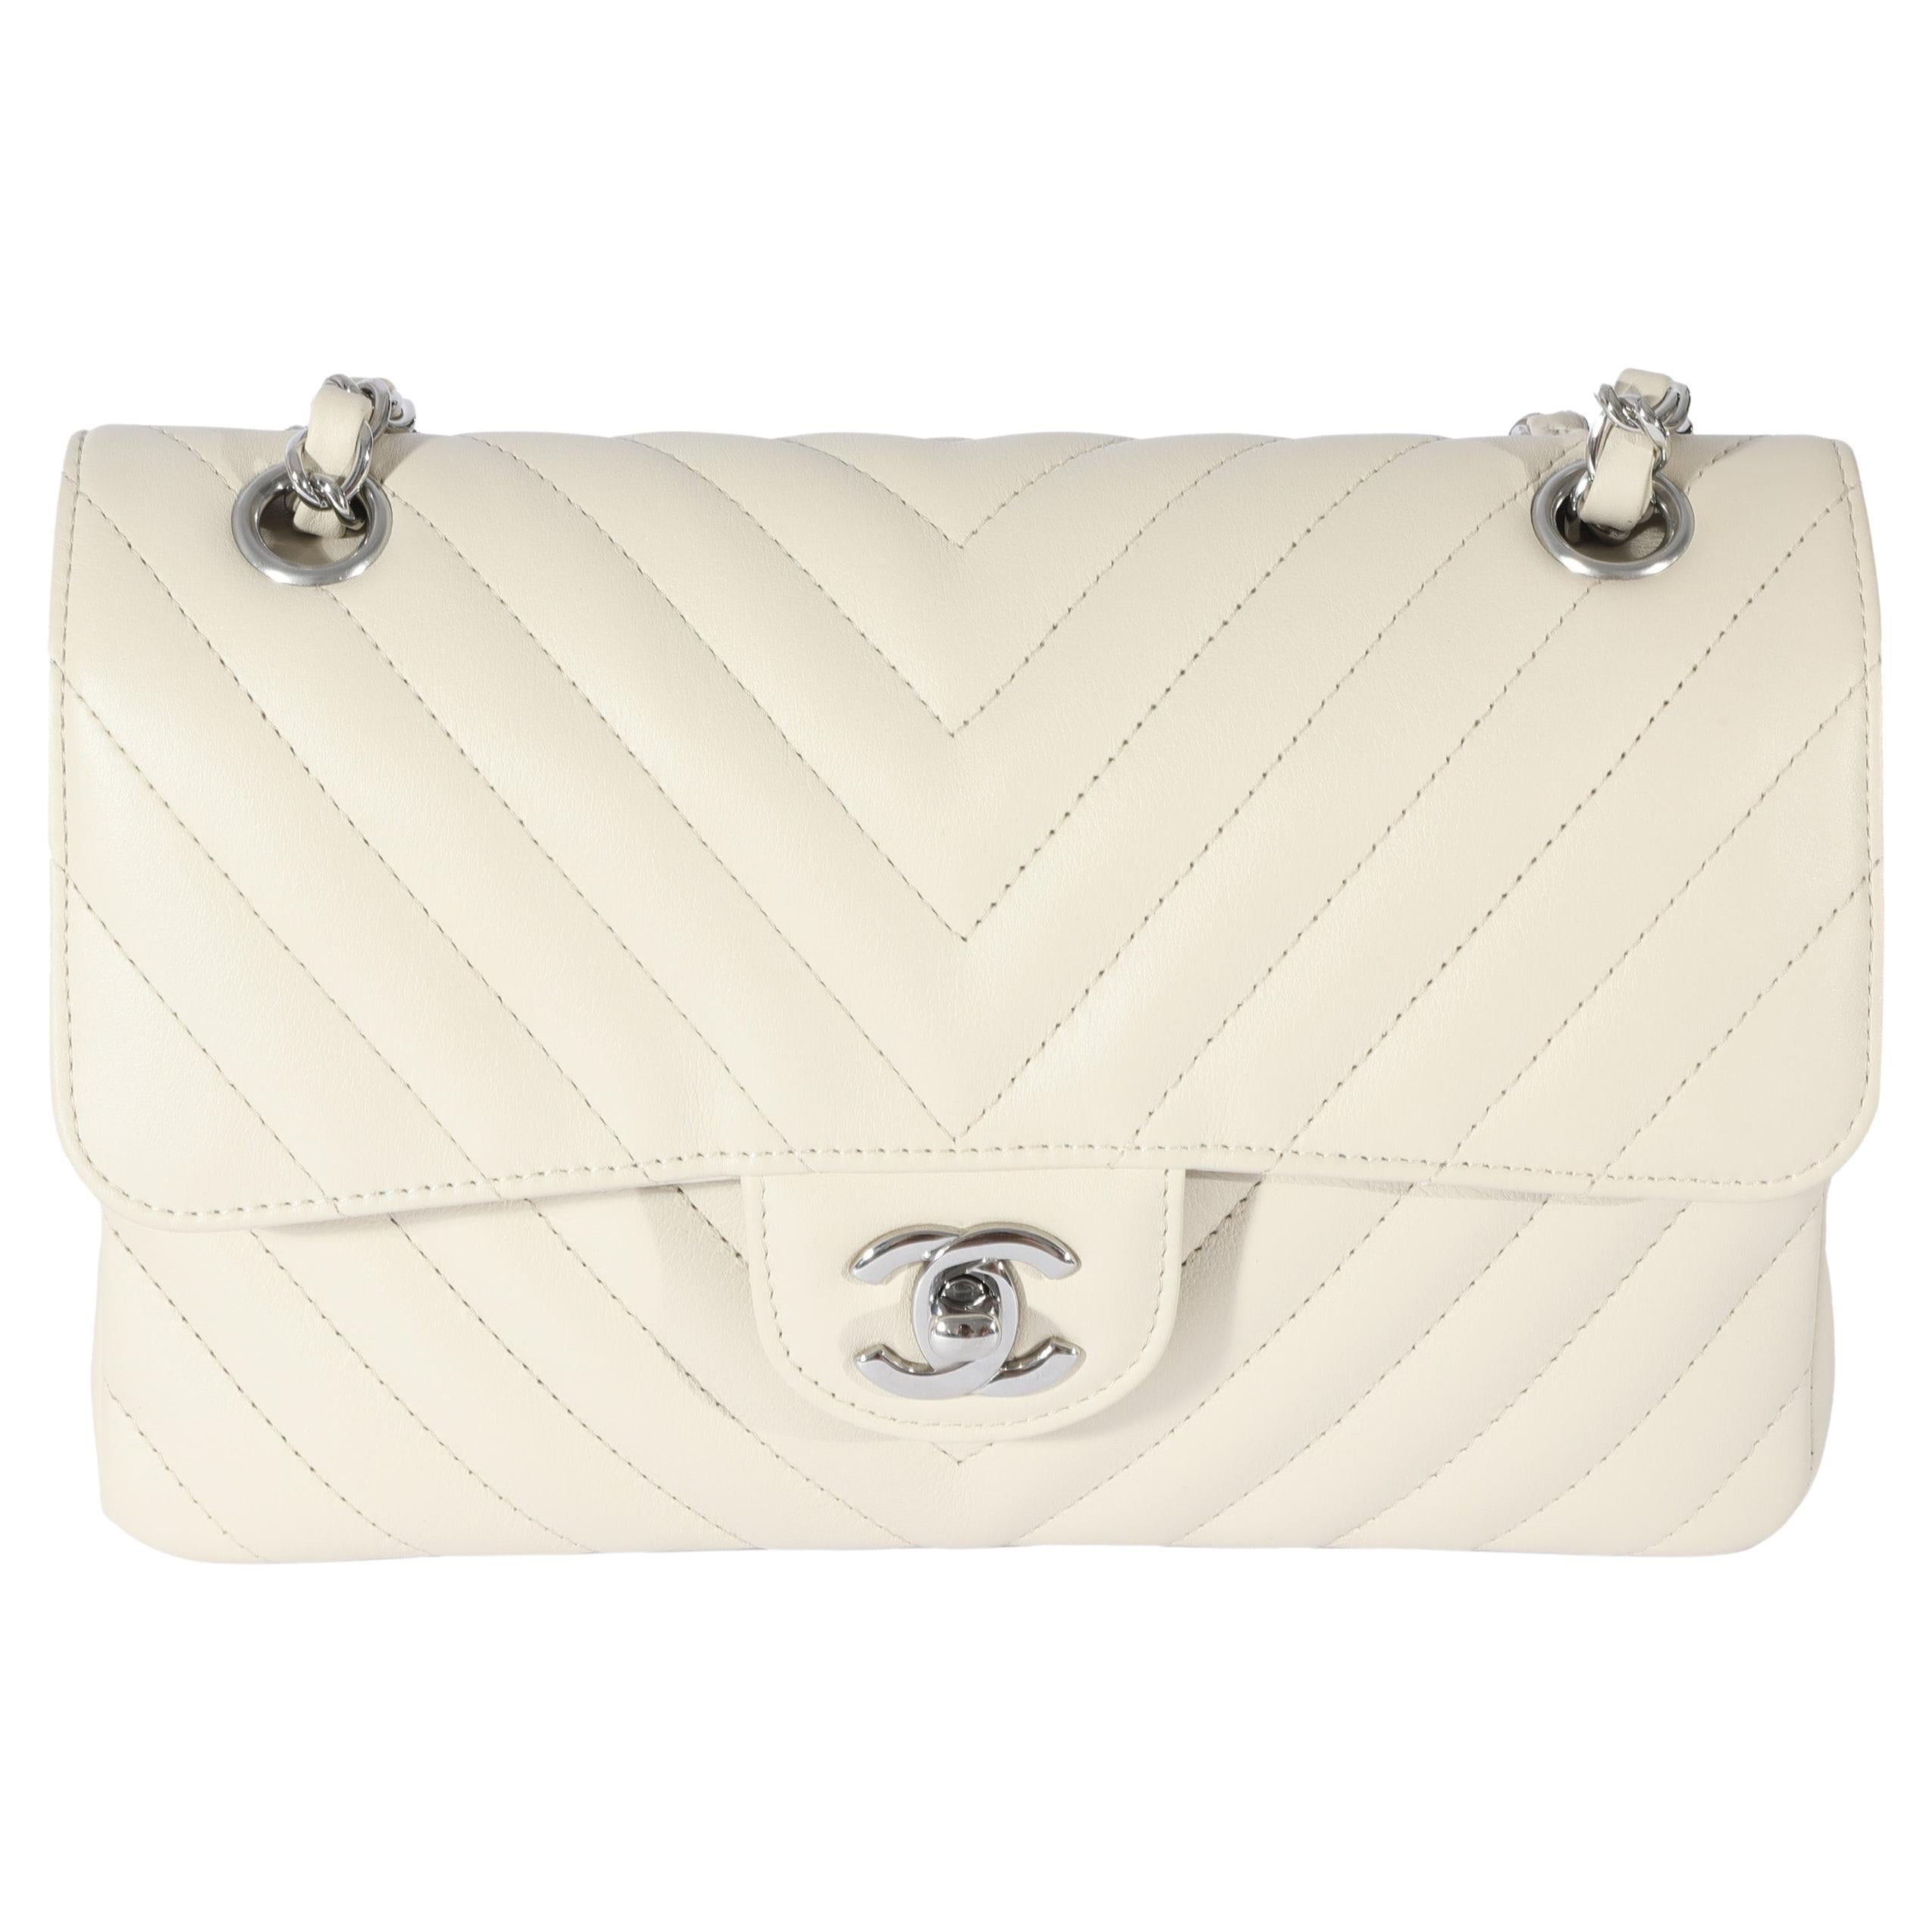 Chanel Neutral Chevron Quilted Leather Small Classic Flap